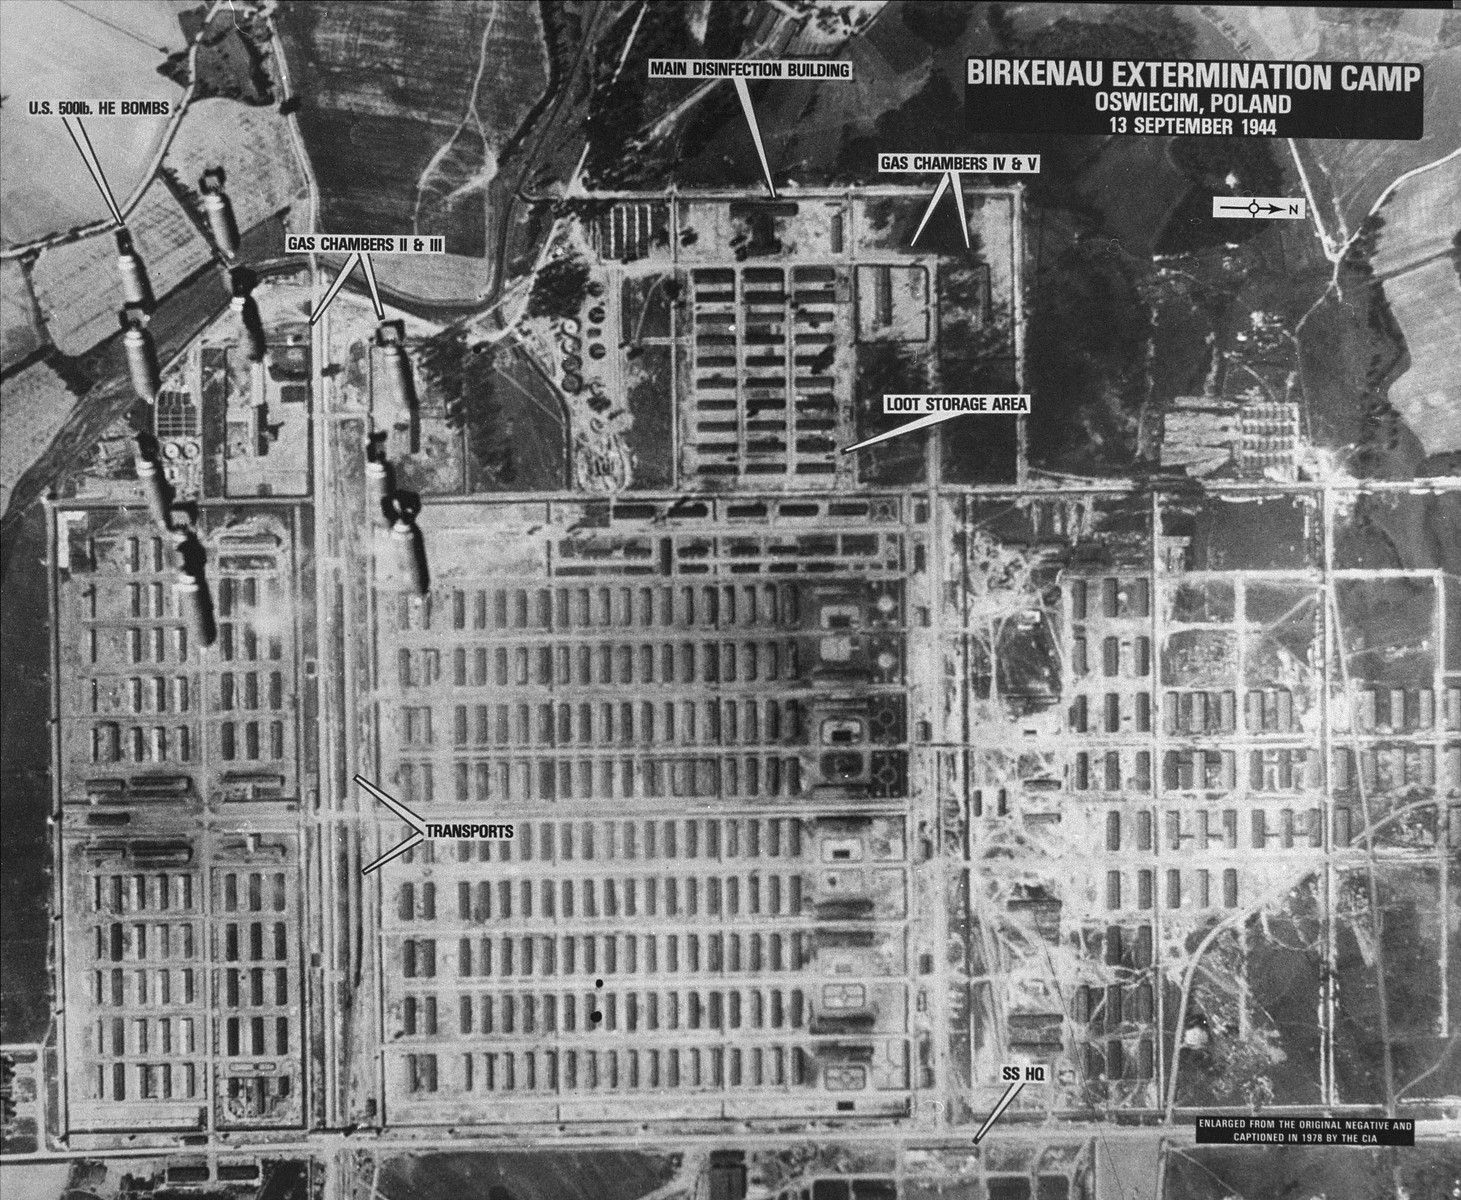 An aerial reconnaissance photograph of the Auschwitz concentration camp showing the Auschwitz II (Birkenau) camp with bombs descending over crematoria II and III.
Mission:  464 BG:4M97;  Scale: 1/23,000;  Focal Length: 12";  Altitude: 23,000';